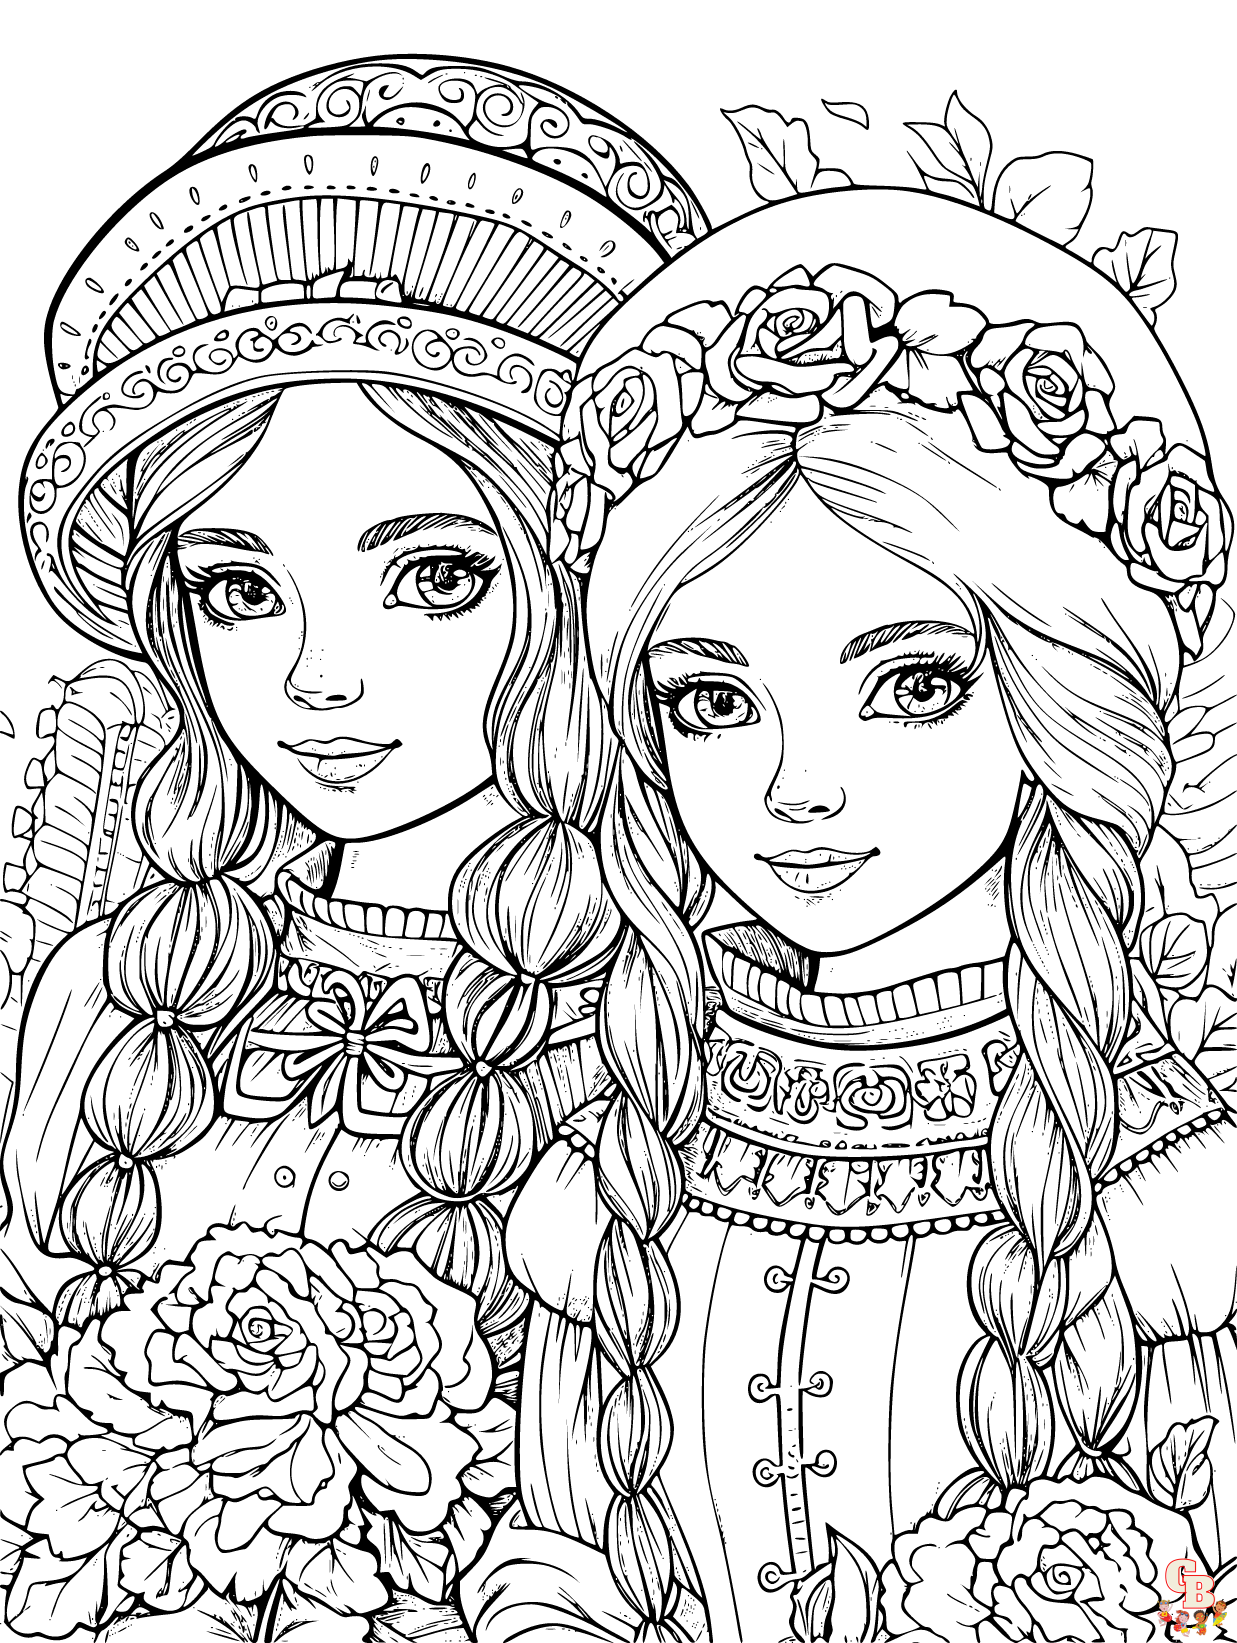 Sister coloring pages to print